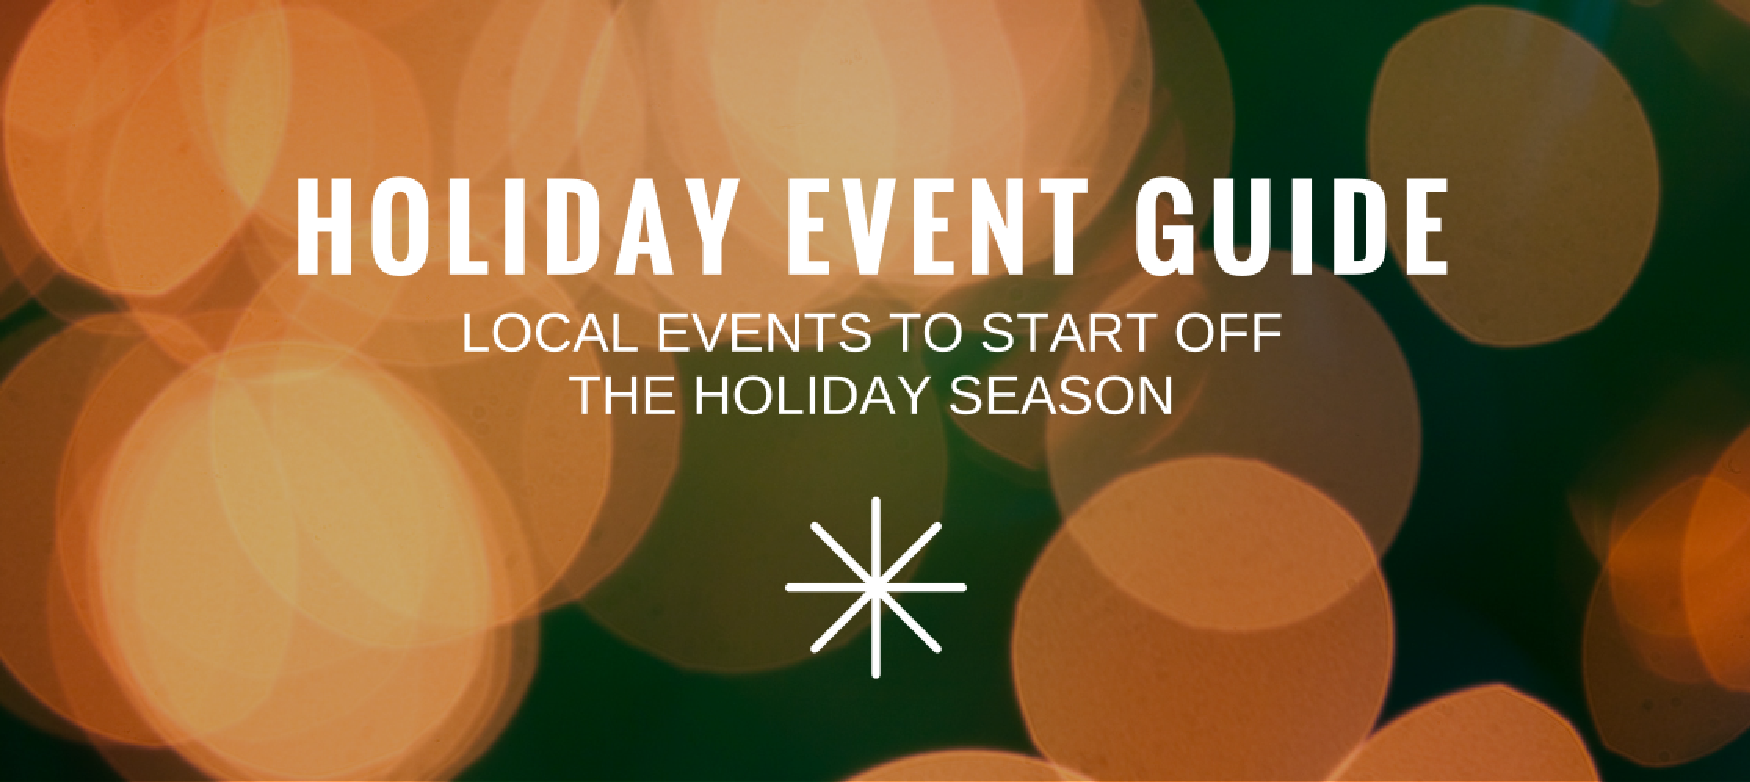 2016-pheonix-holiday-event-guide